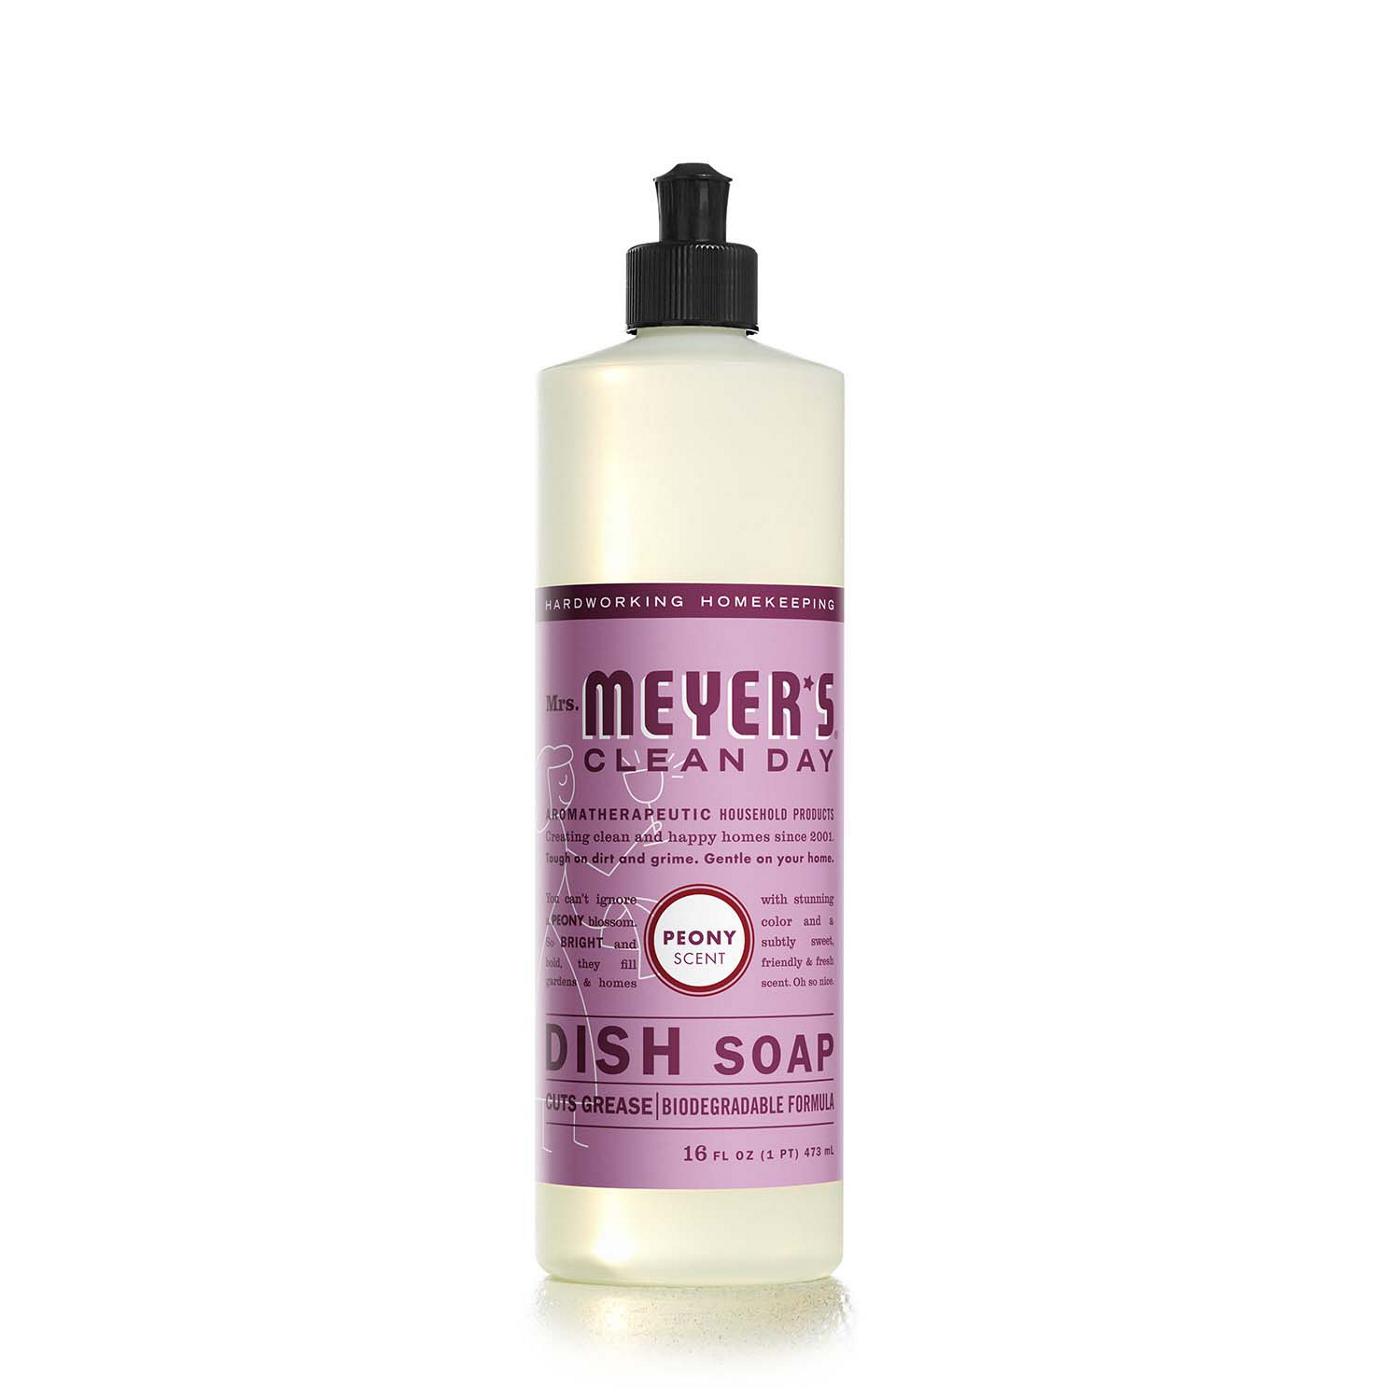 Mrs. Meyer's Clean Day Peony Scent Dish Soap; image 1 of 4